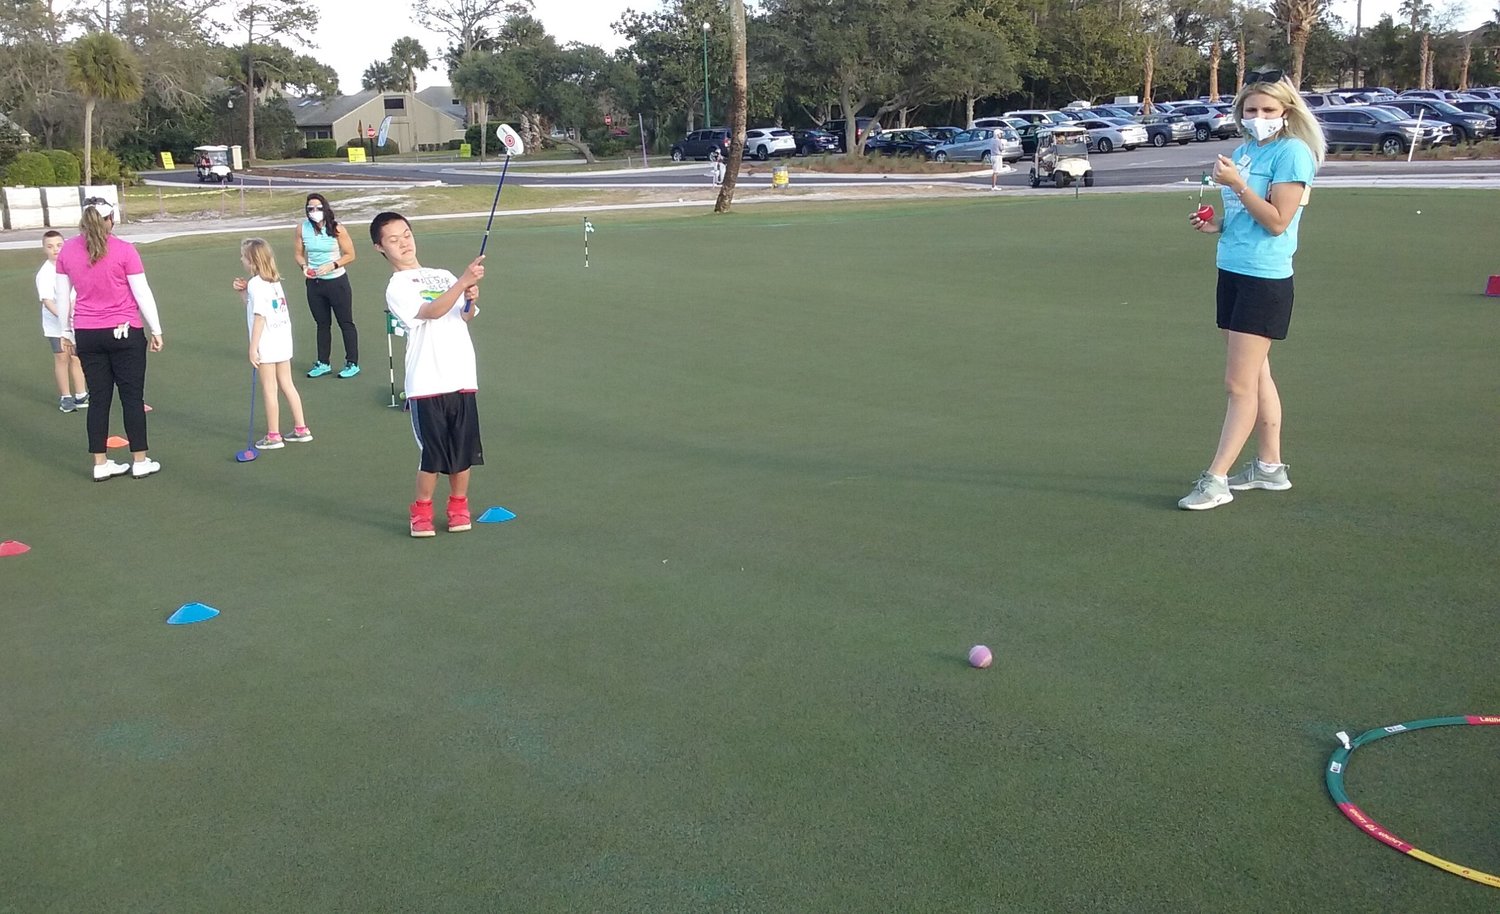 A young golfer makes a successful putt during the Tesori Family Foundation All-Star Kids Clinic on March 10.